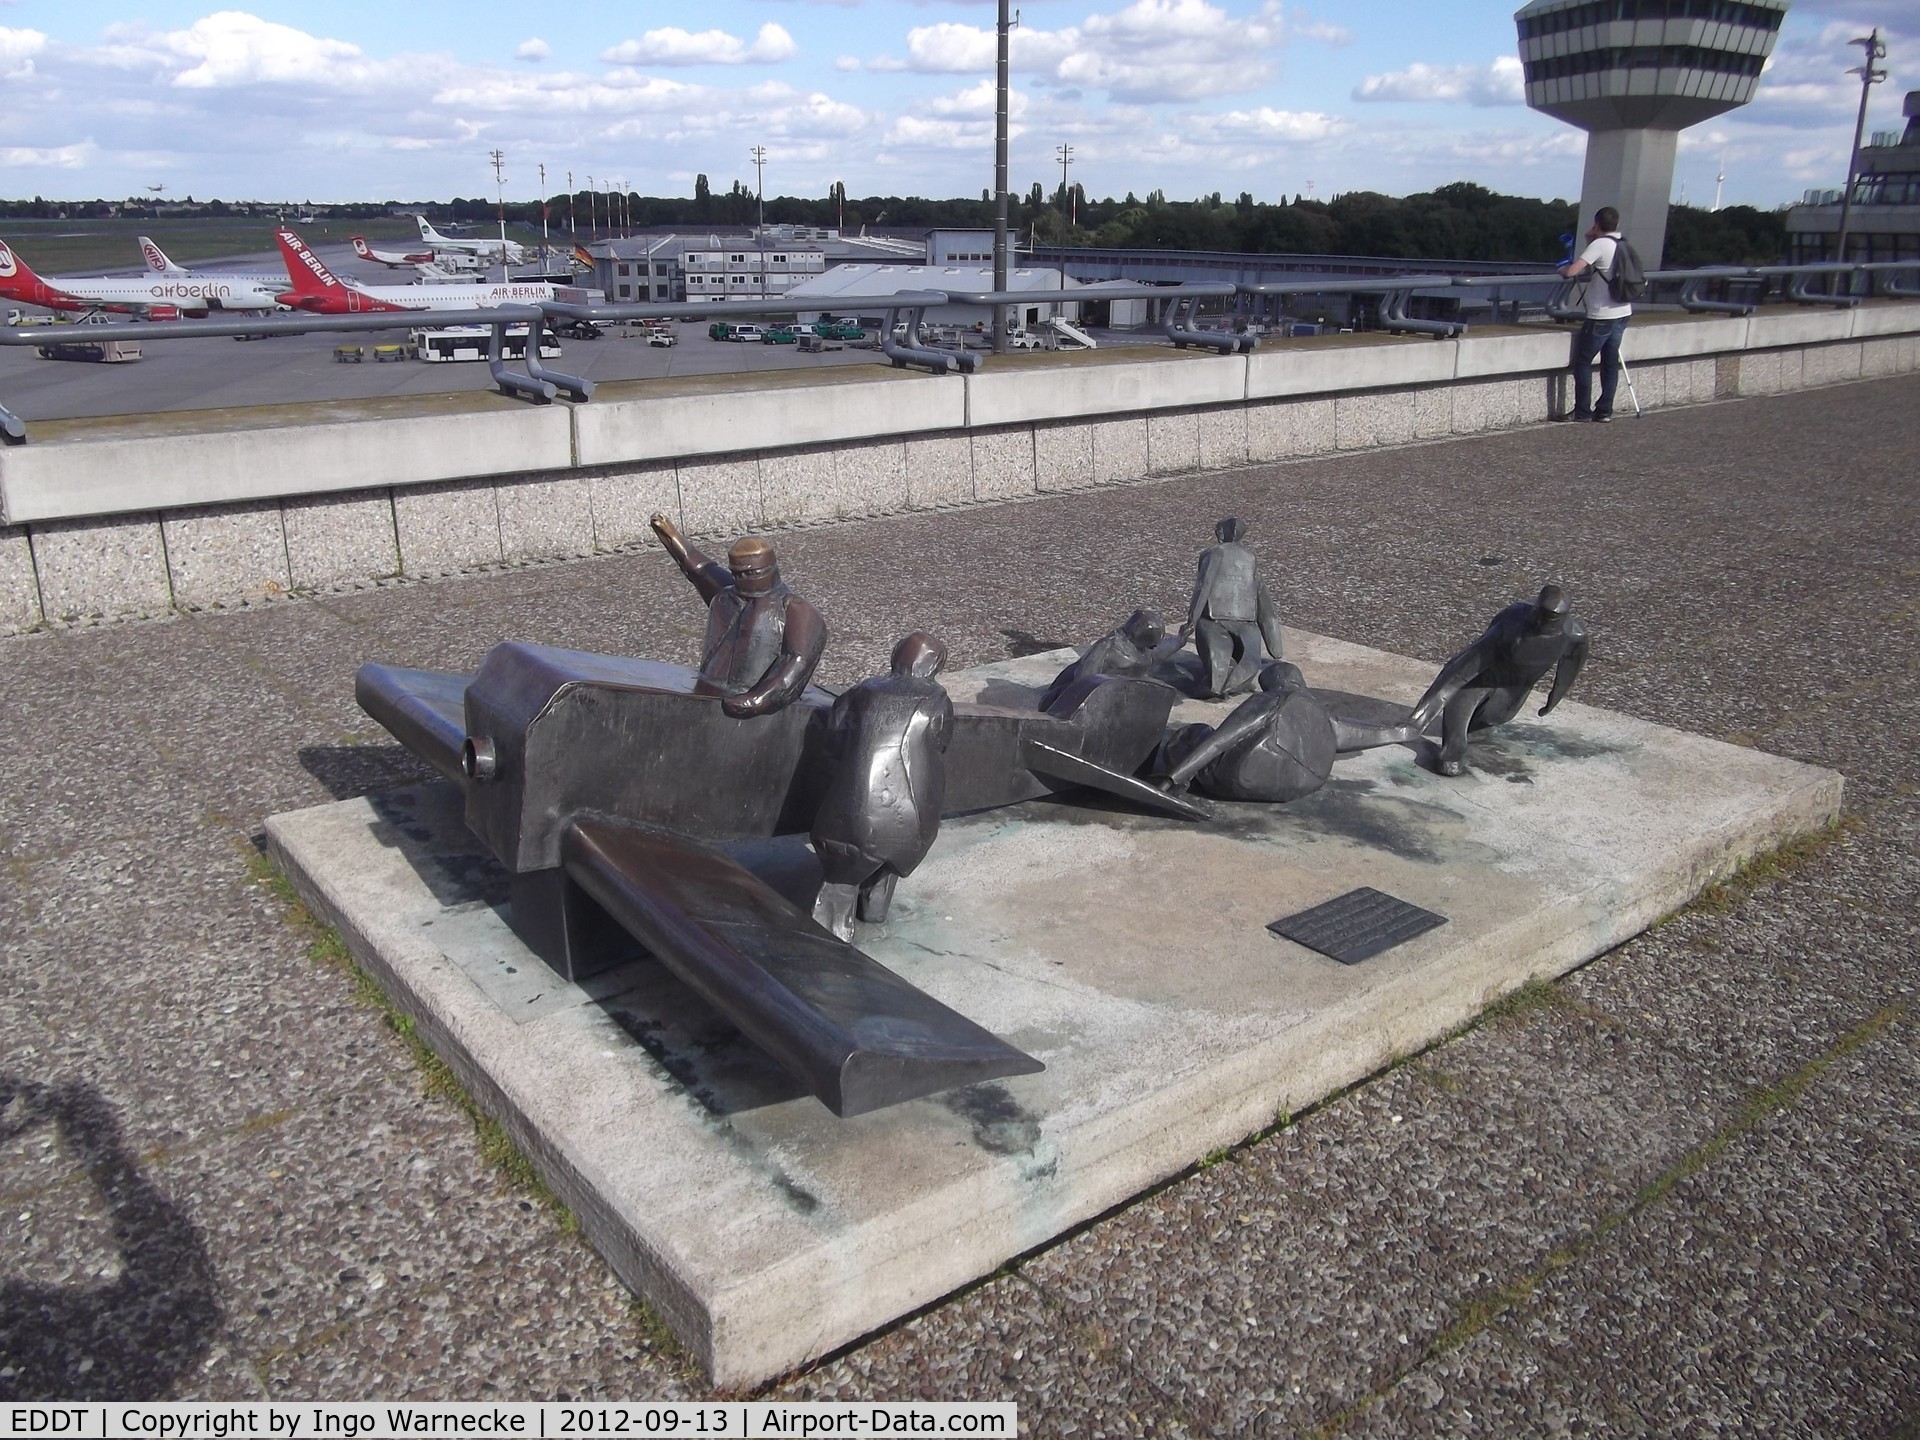 Tegel International Airport (closing in 2011), Berlin Germany (EDDT) - another sculpture on the viewing platform at Berlin-Tegel